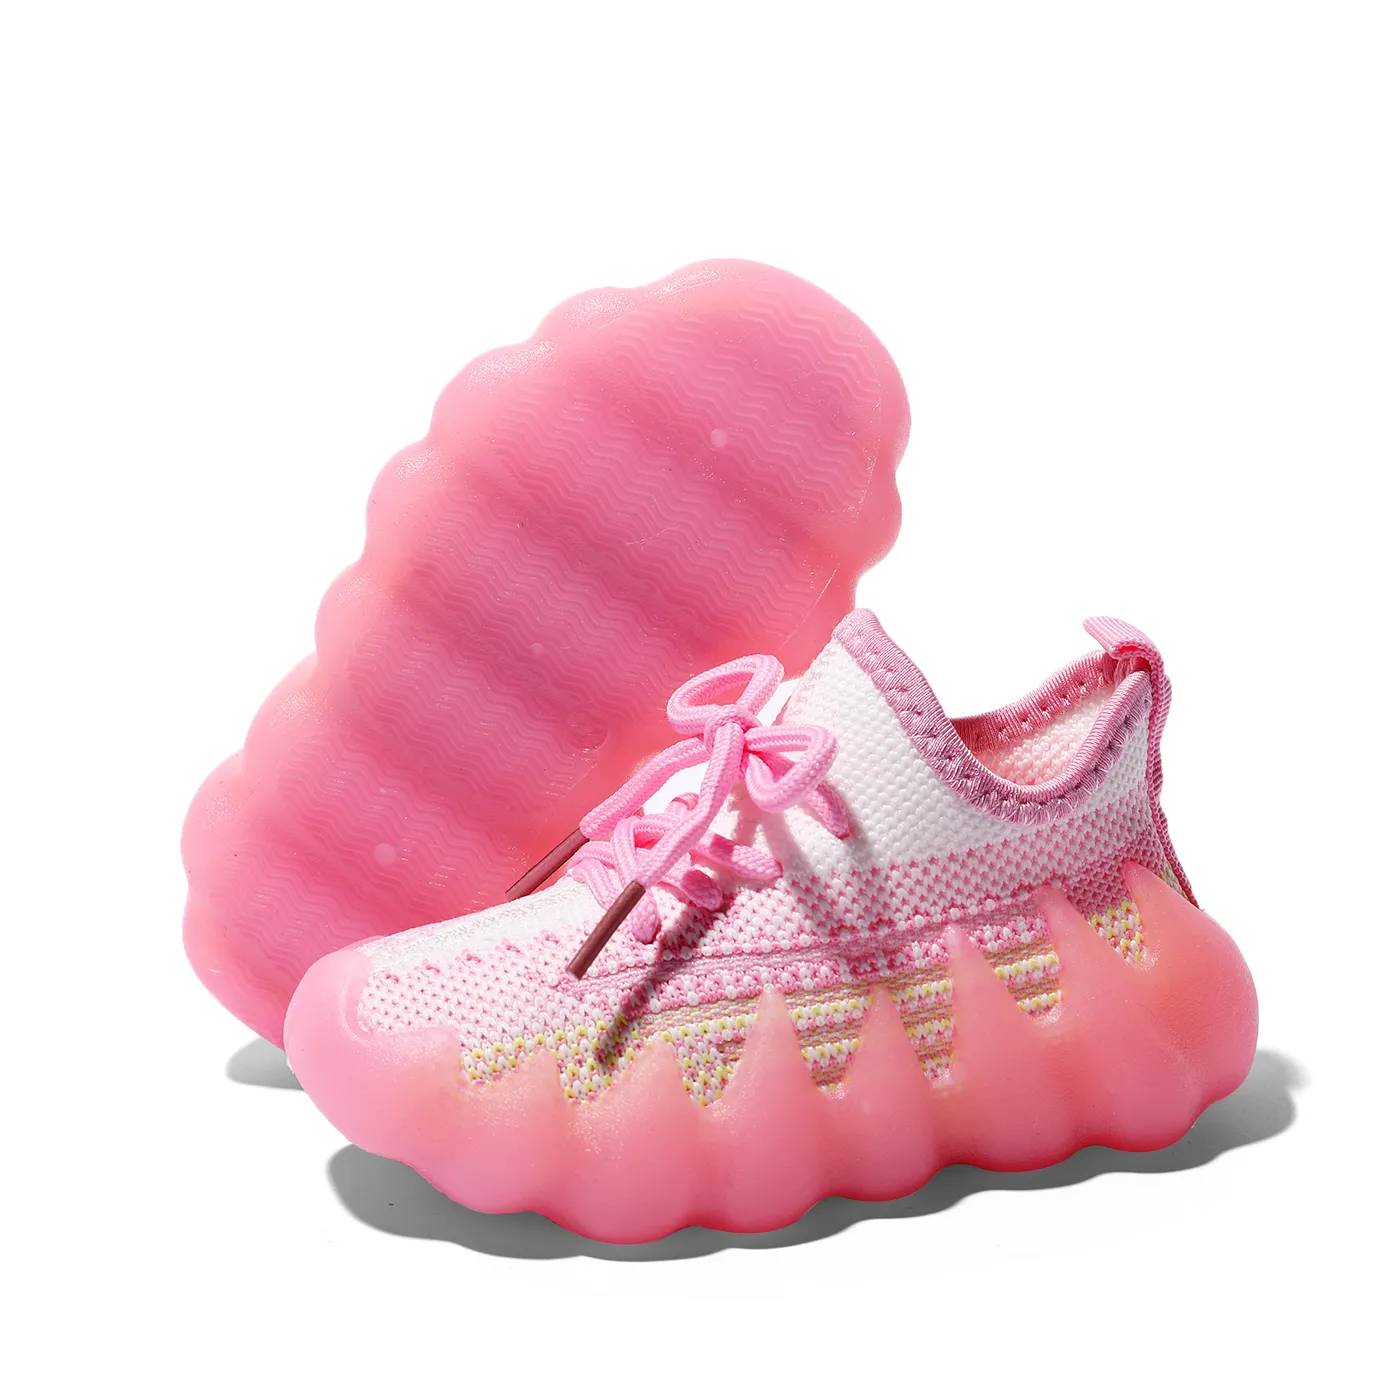 Toddler/Kid Lace-up Front Antidérapant Soft Sole Weary Resistant Sporty Shoes